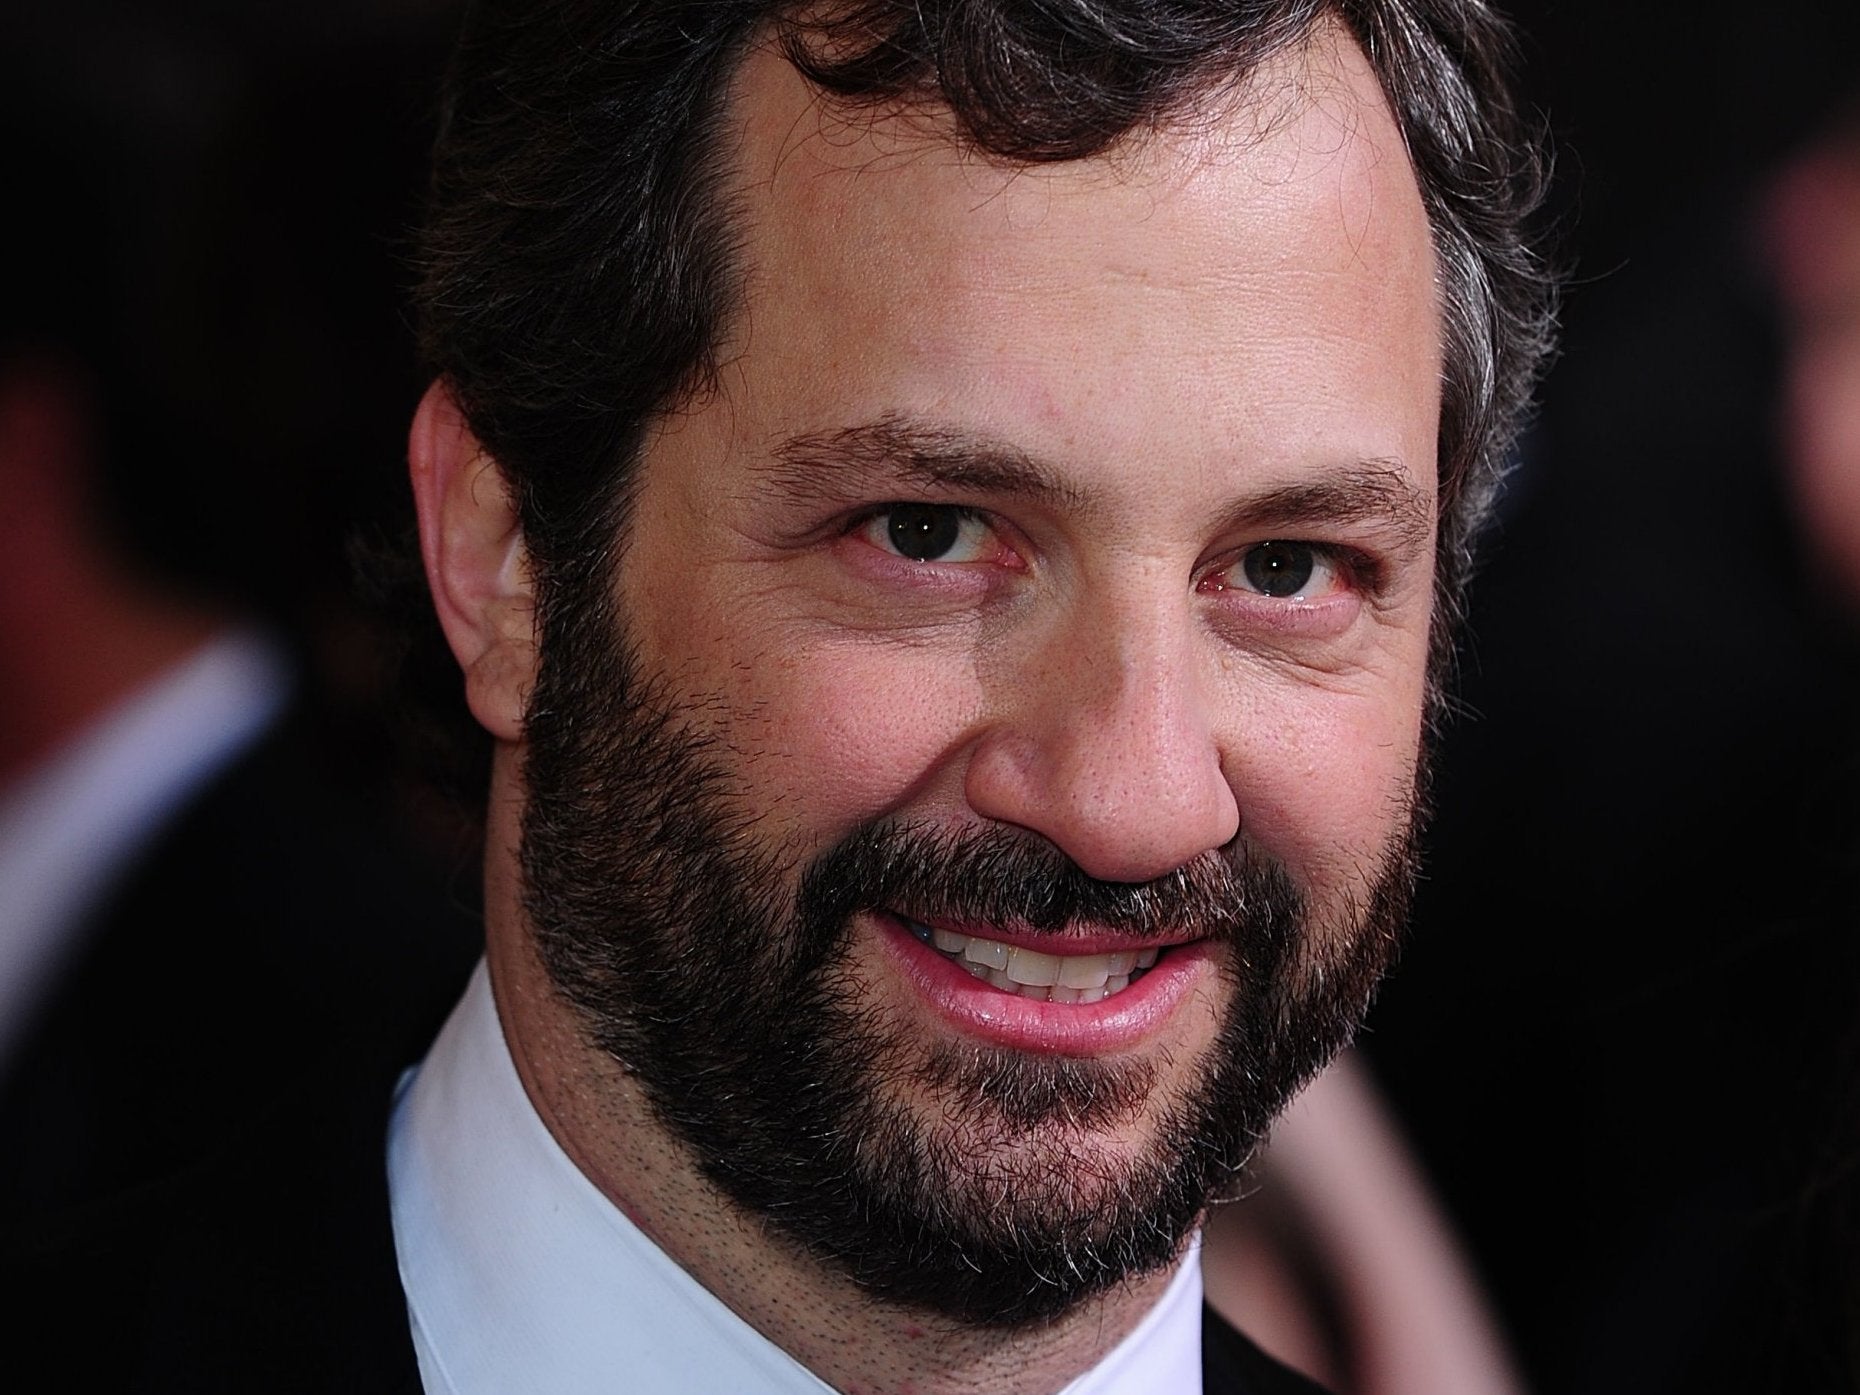 Judd Apatow is best known for directing 'The 40-Year-Old Virgin' and 'Knocked Up', as well as producing the 'Anchorman' films